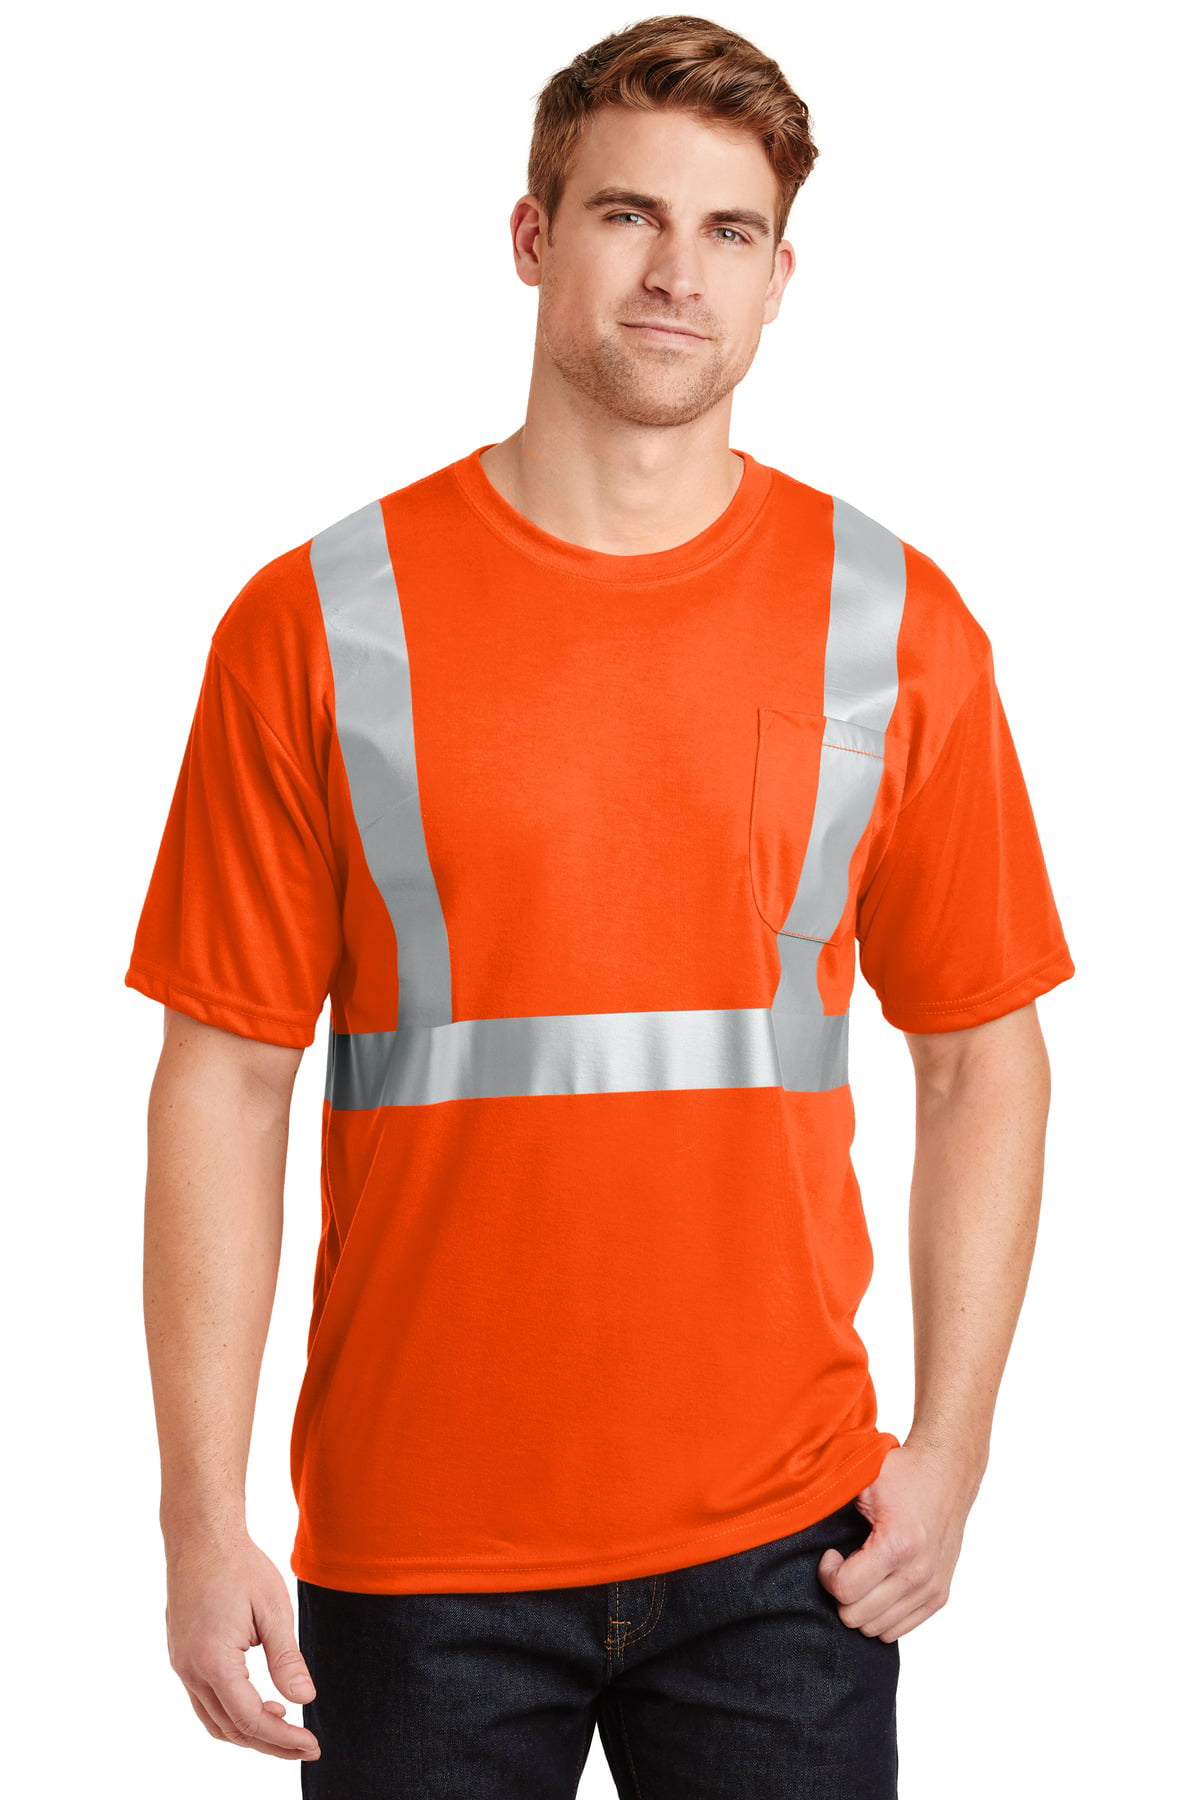 SAFETY T-SHIRT MESH PERFORMANCE CLASS 2 PACK OF 2 FOR MEN ANSI/SEA 107-2004 